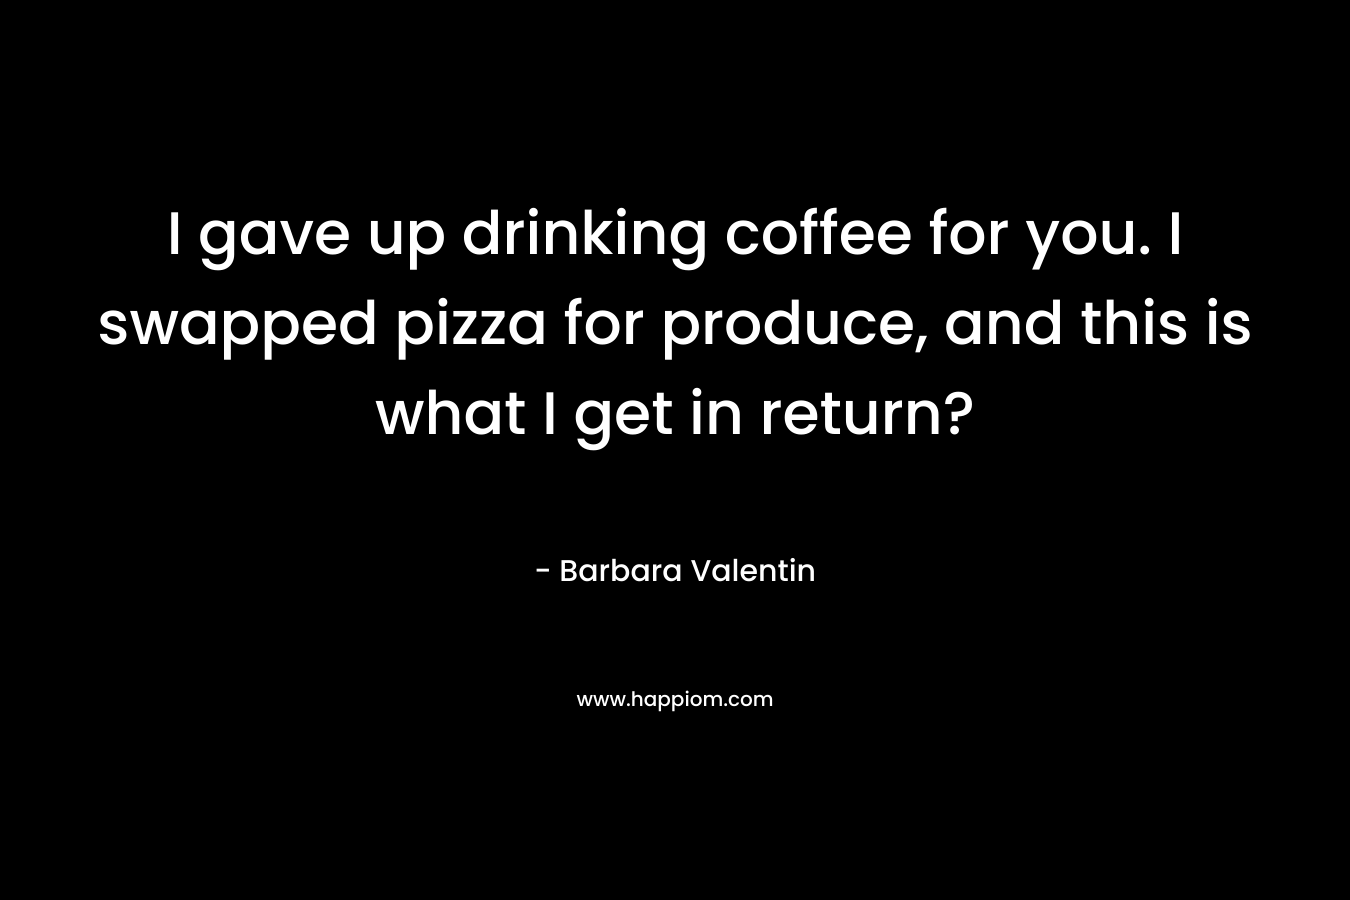 I gave up drinking coffee for you. I swapped pizza for produce, and this is what I get in return? – Barbara Valentin